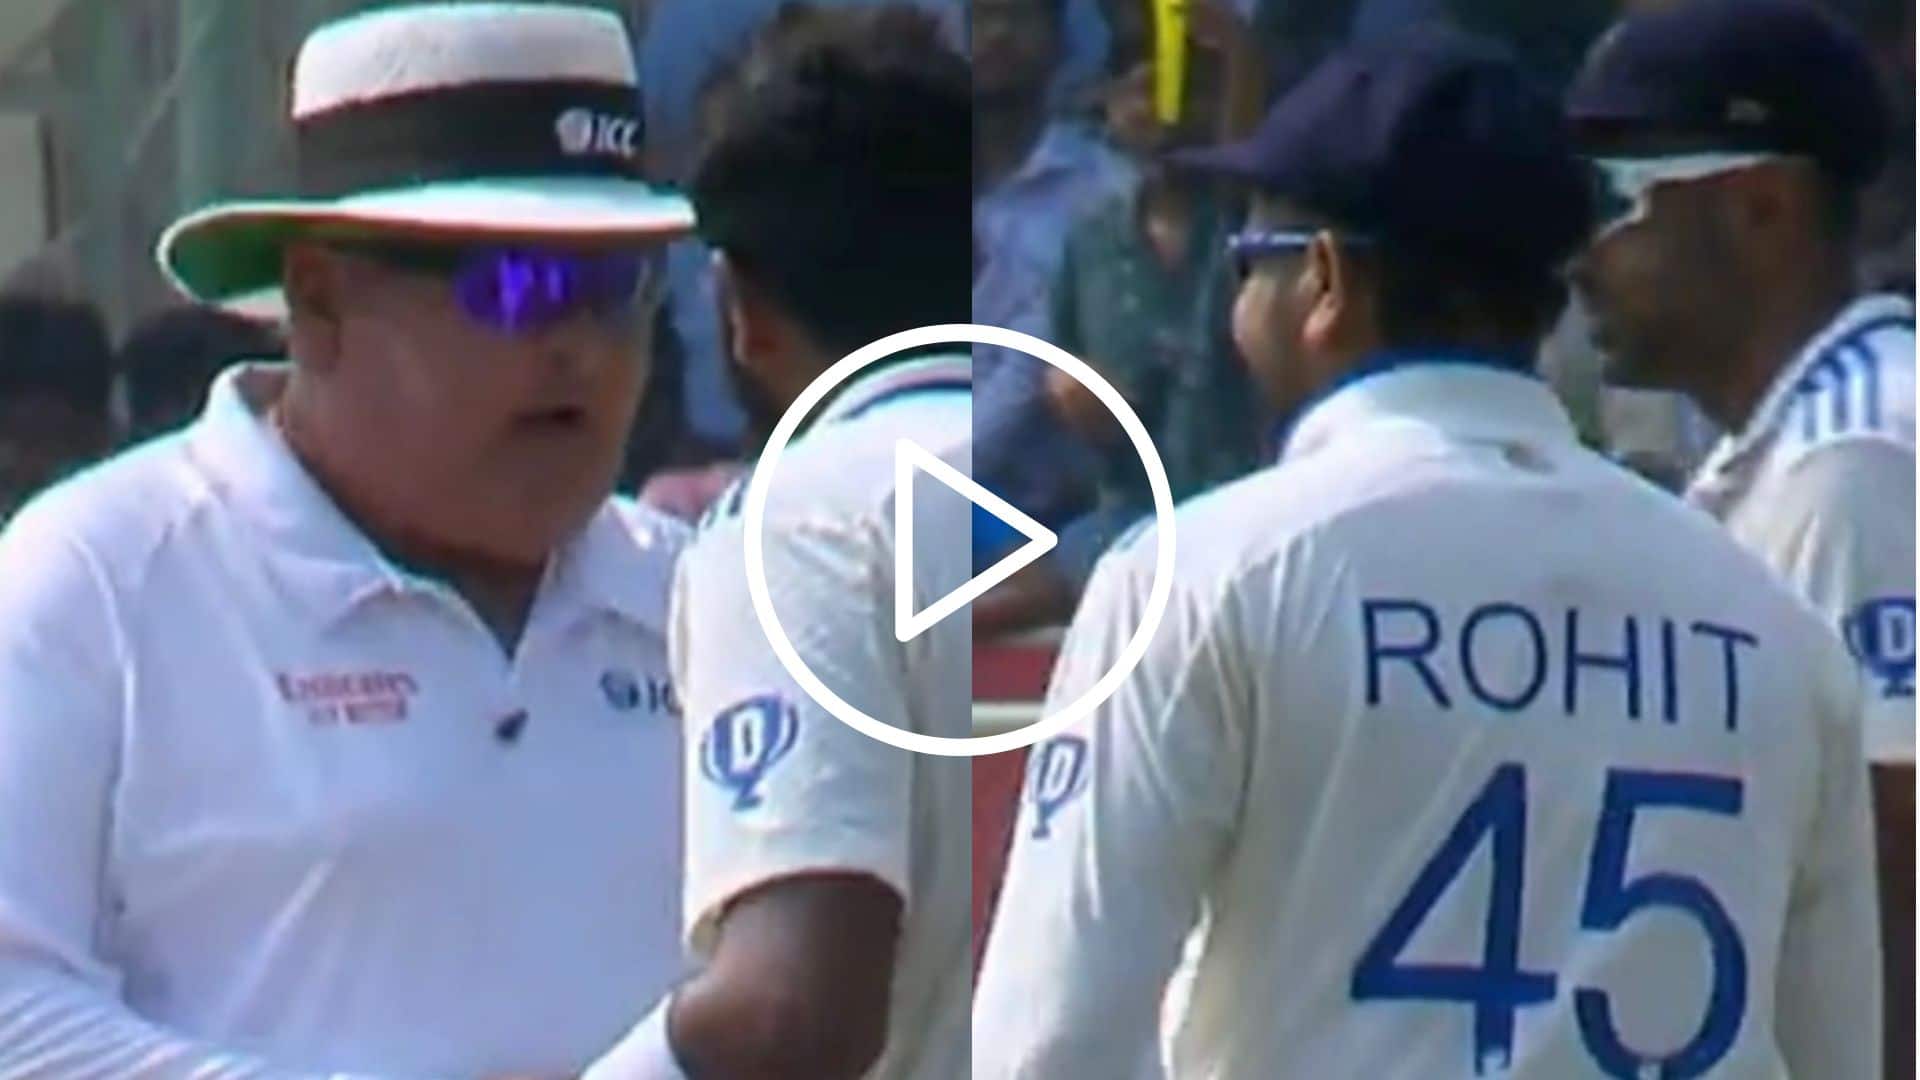 [Watch] 'What Do You Think?' - Rohit Sharma Teases Umpire Over A Review; Leaves Commentators In Splits